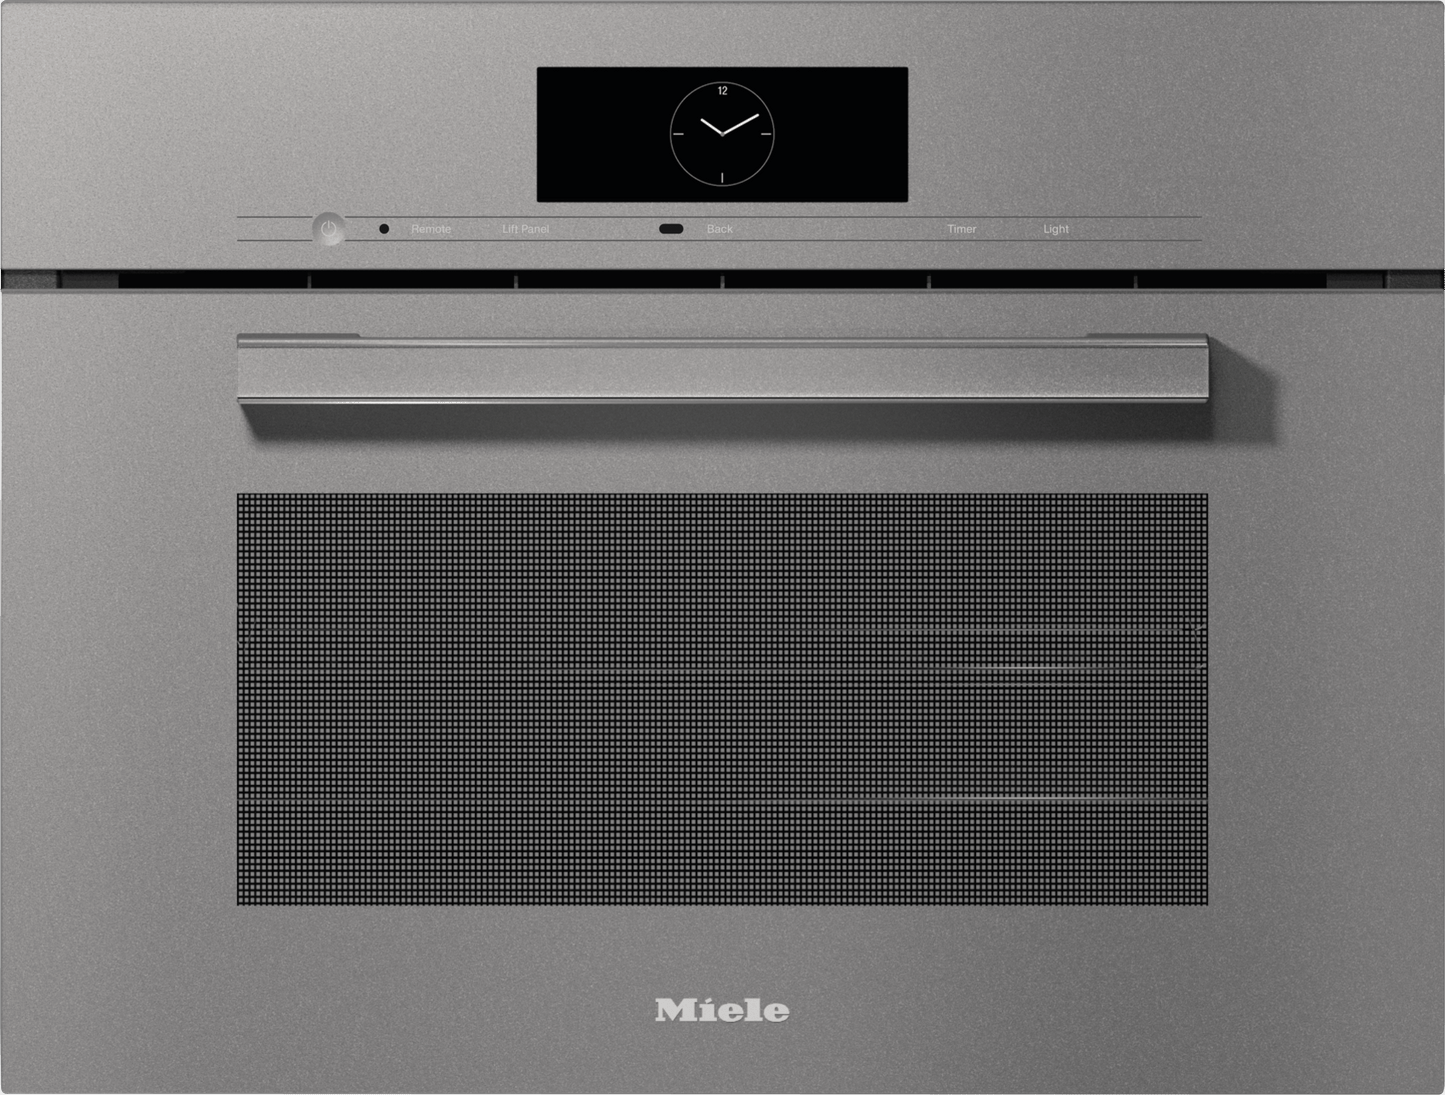 Miele DGC7840AMGRAPHITEGREY Dgc 7840 Am - 24" Compact Combi-Steam Oven Xl For Steam Cooking, Baking, Roasting With Roast Probe + Menu Cooking.